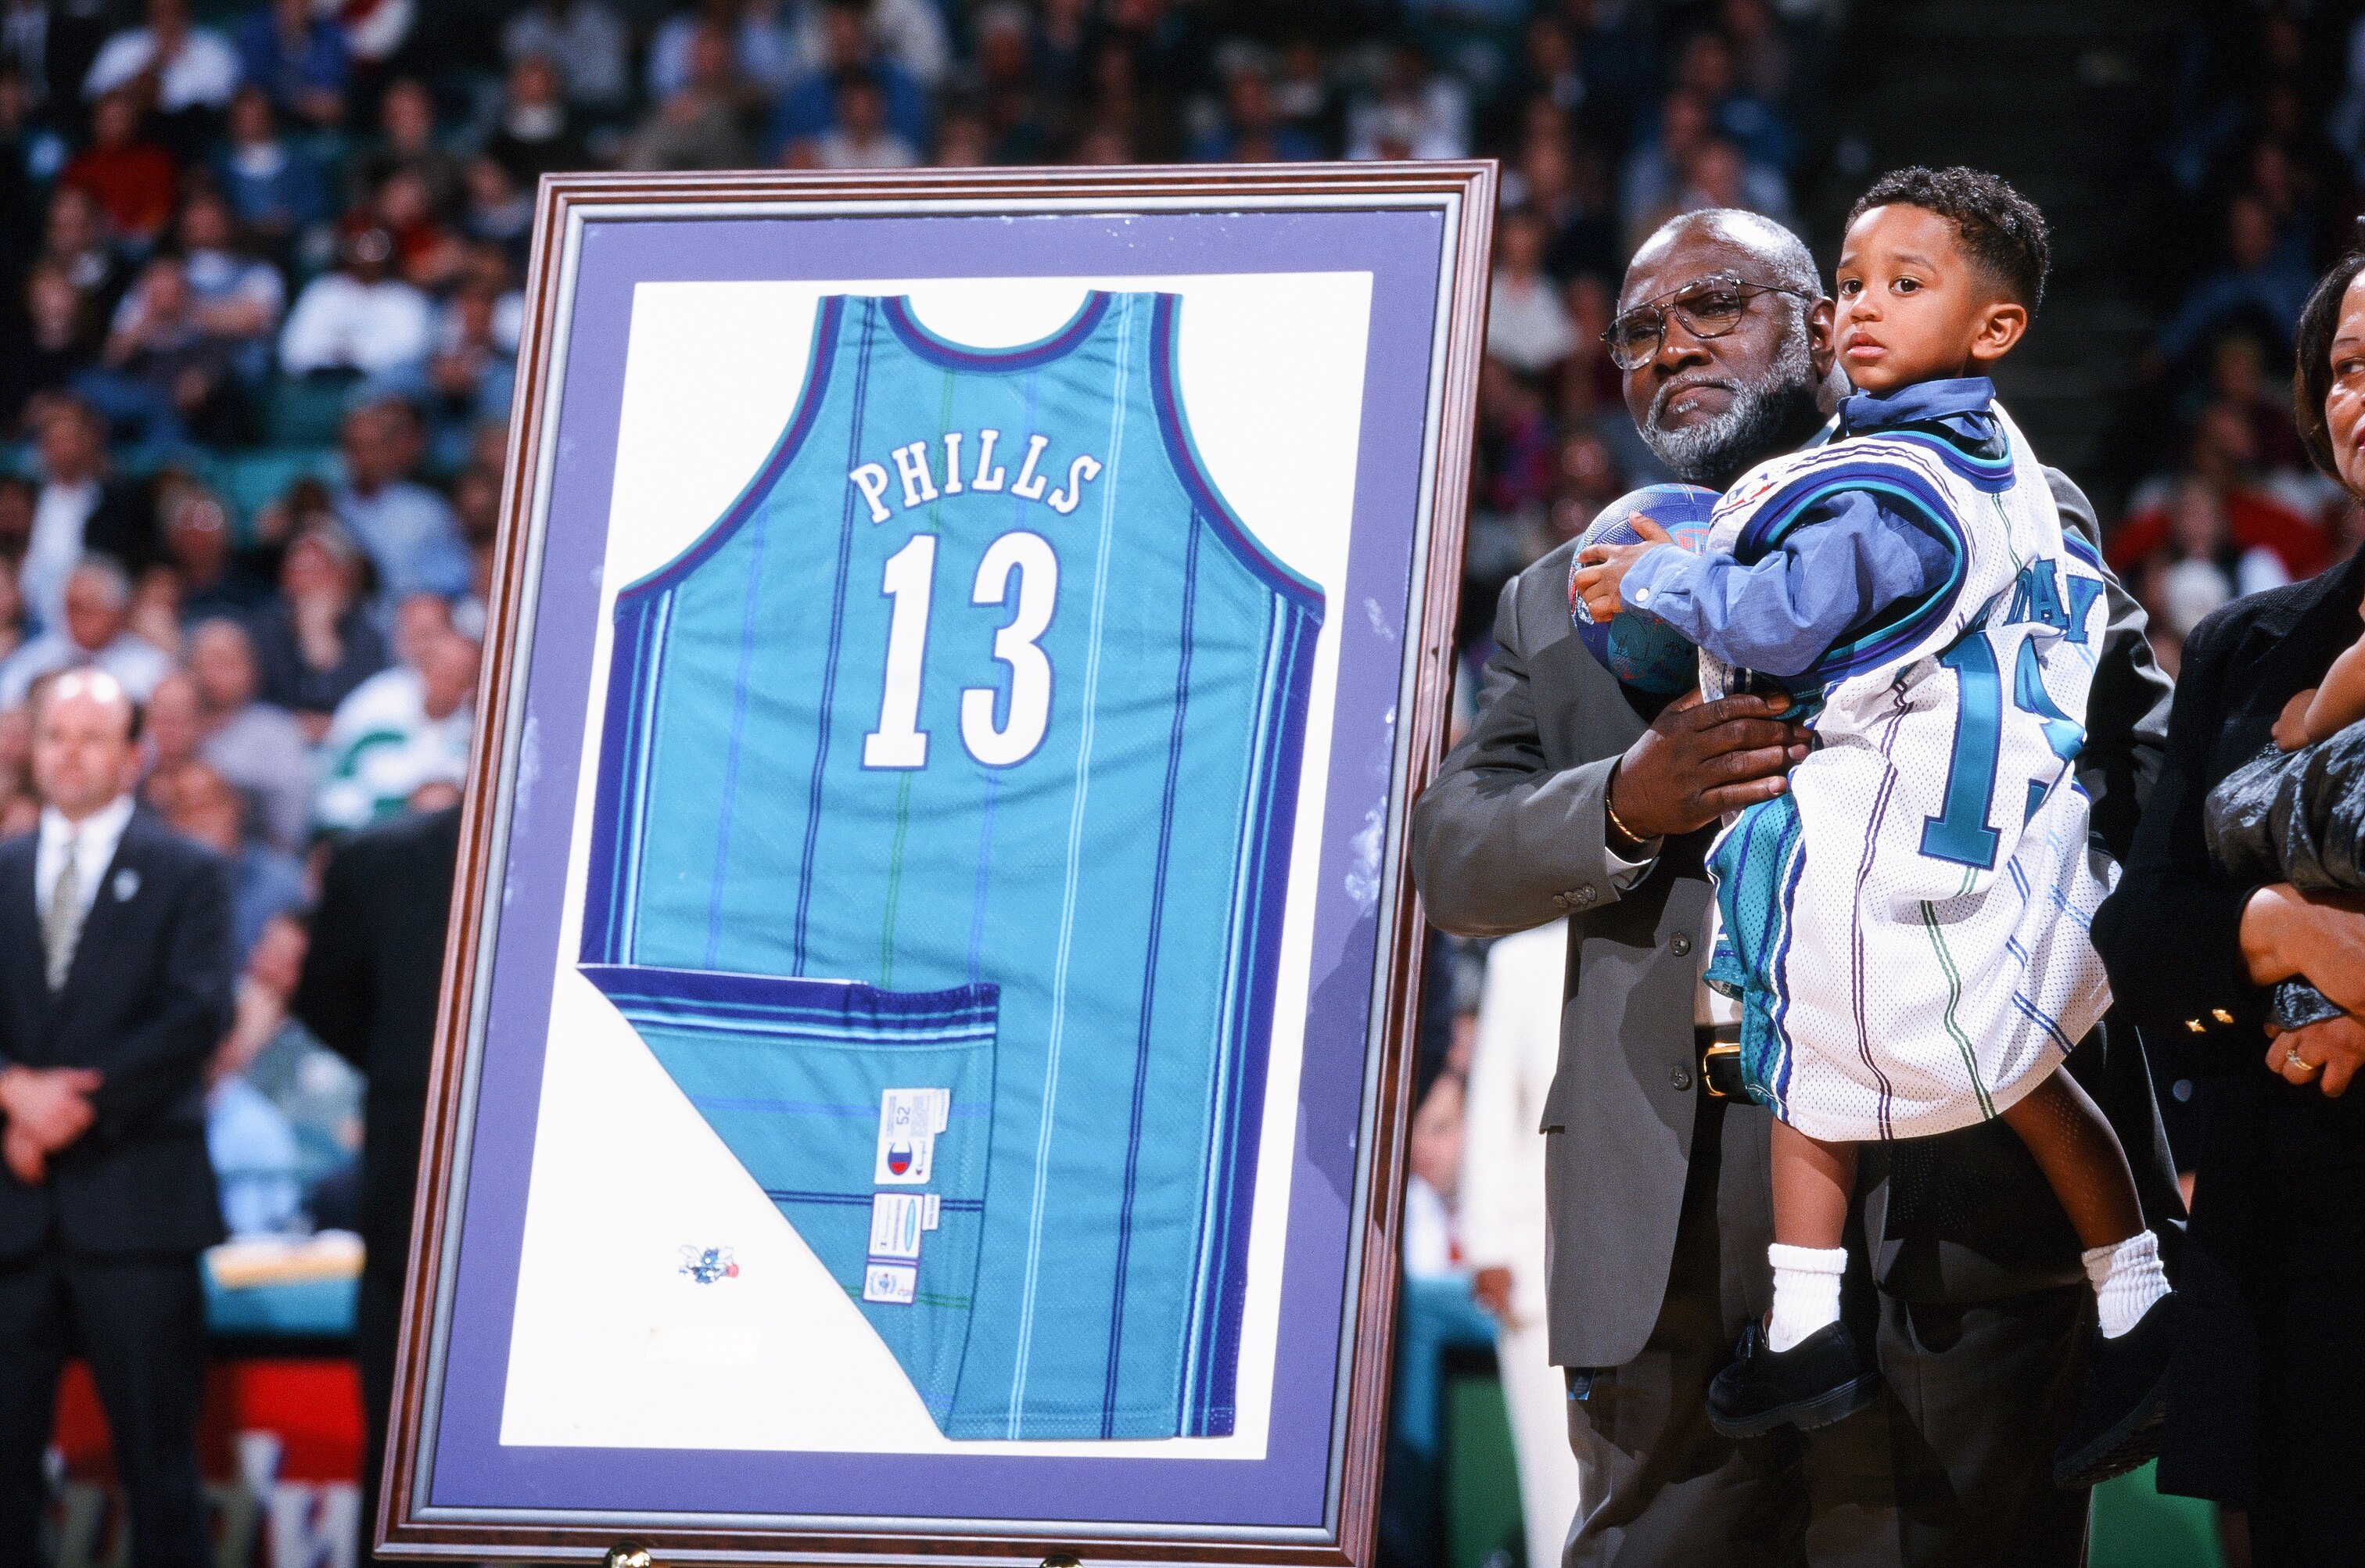 Bobby Phills died when he was just 30 years old. The Charlotte Hornets honored him by retiring his No. 13 jersey not once, but twice.